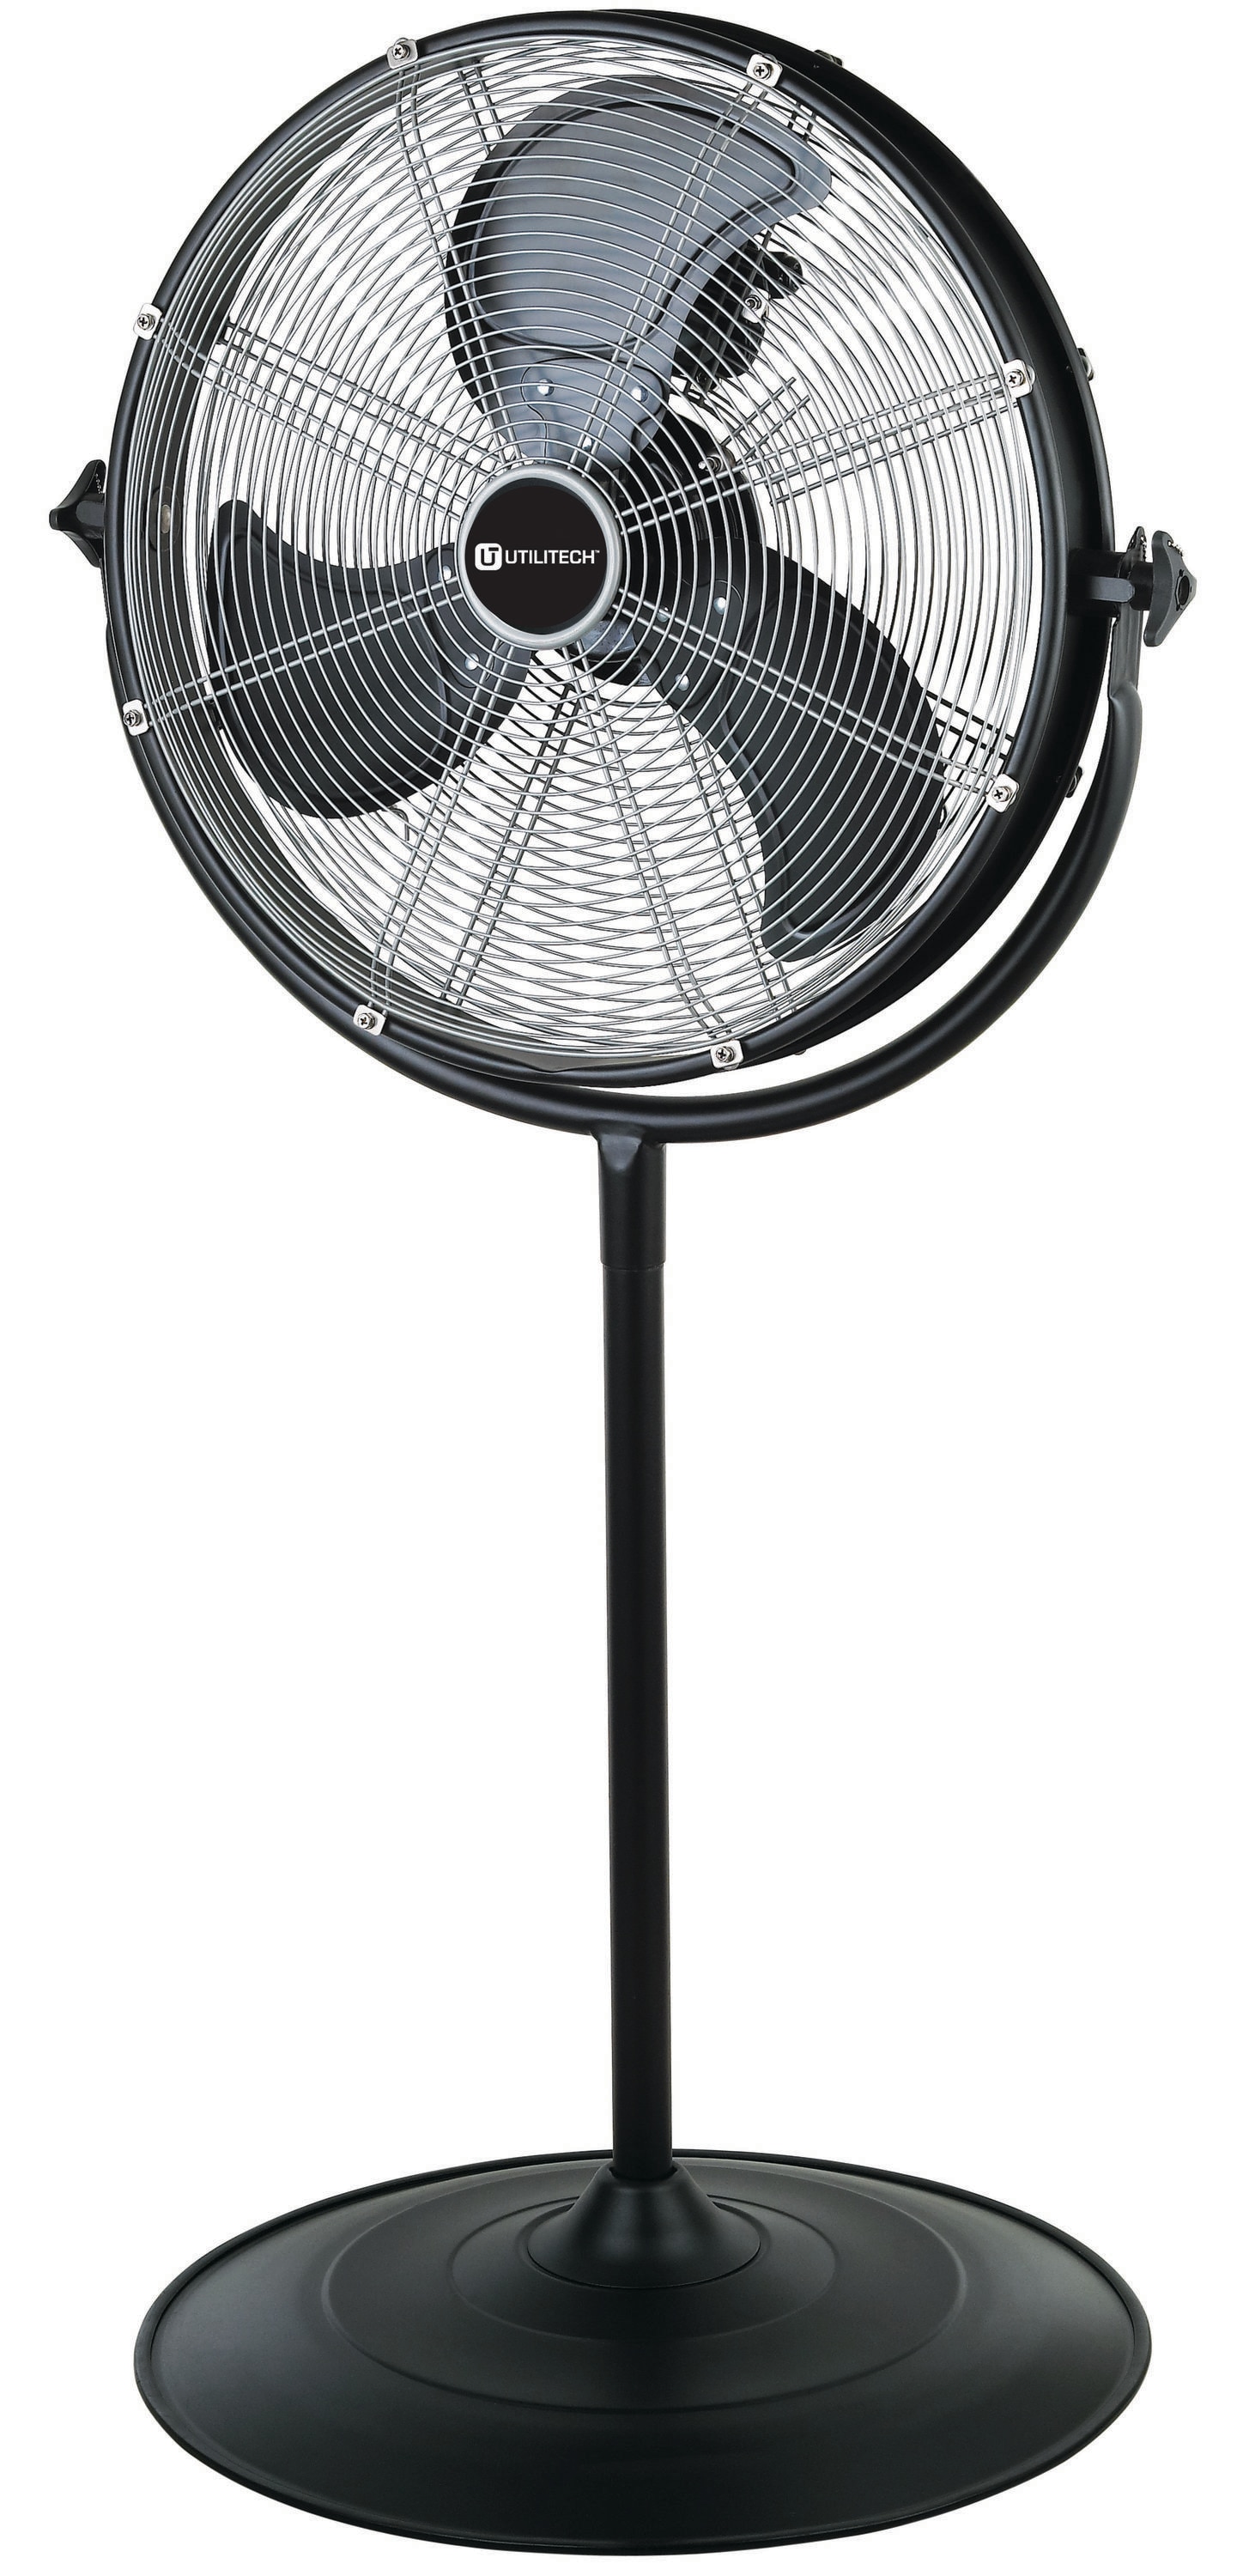 Utilitech 20-in 3-Speed Indoor or Outdoor Pedestal Fan at Lowes.com